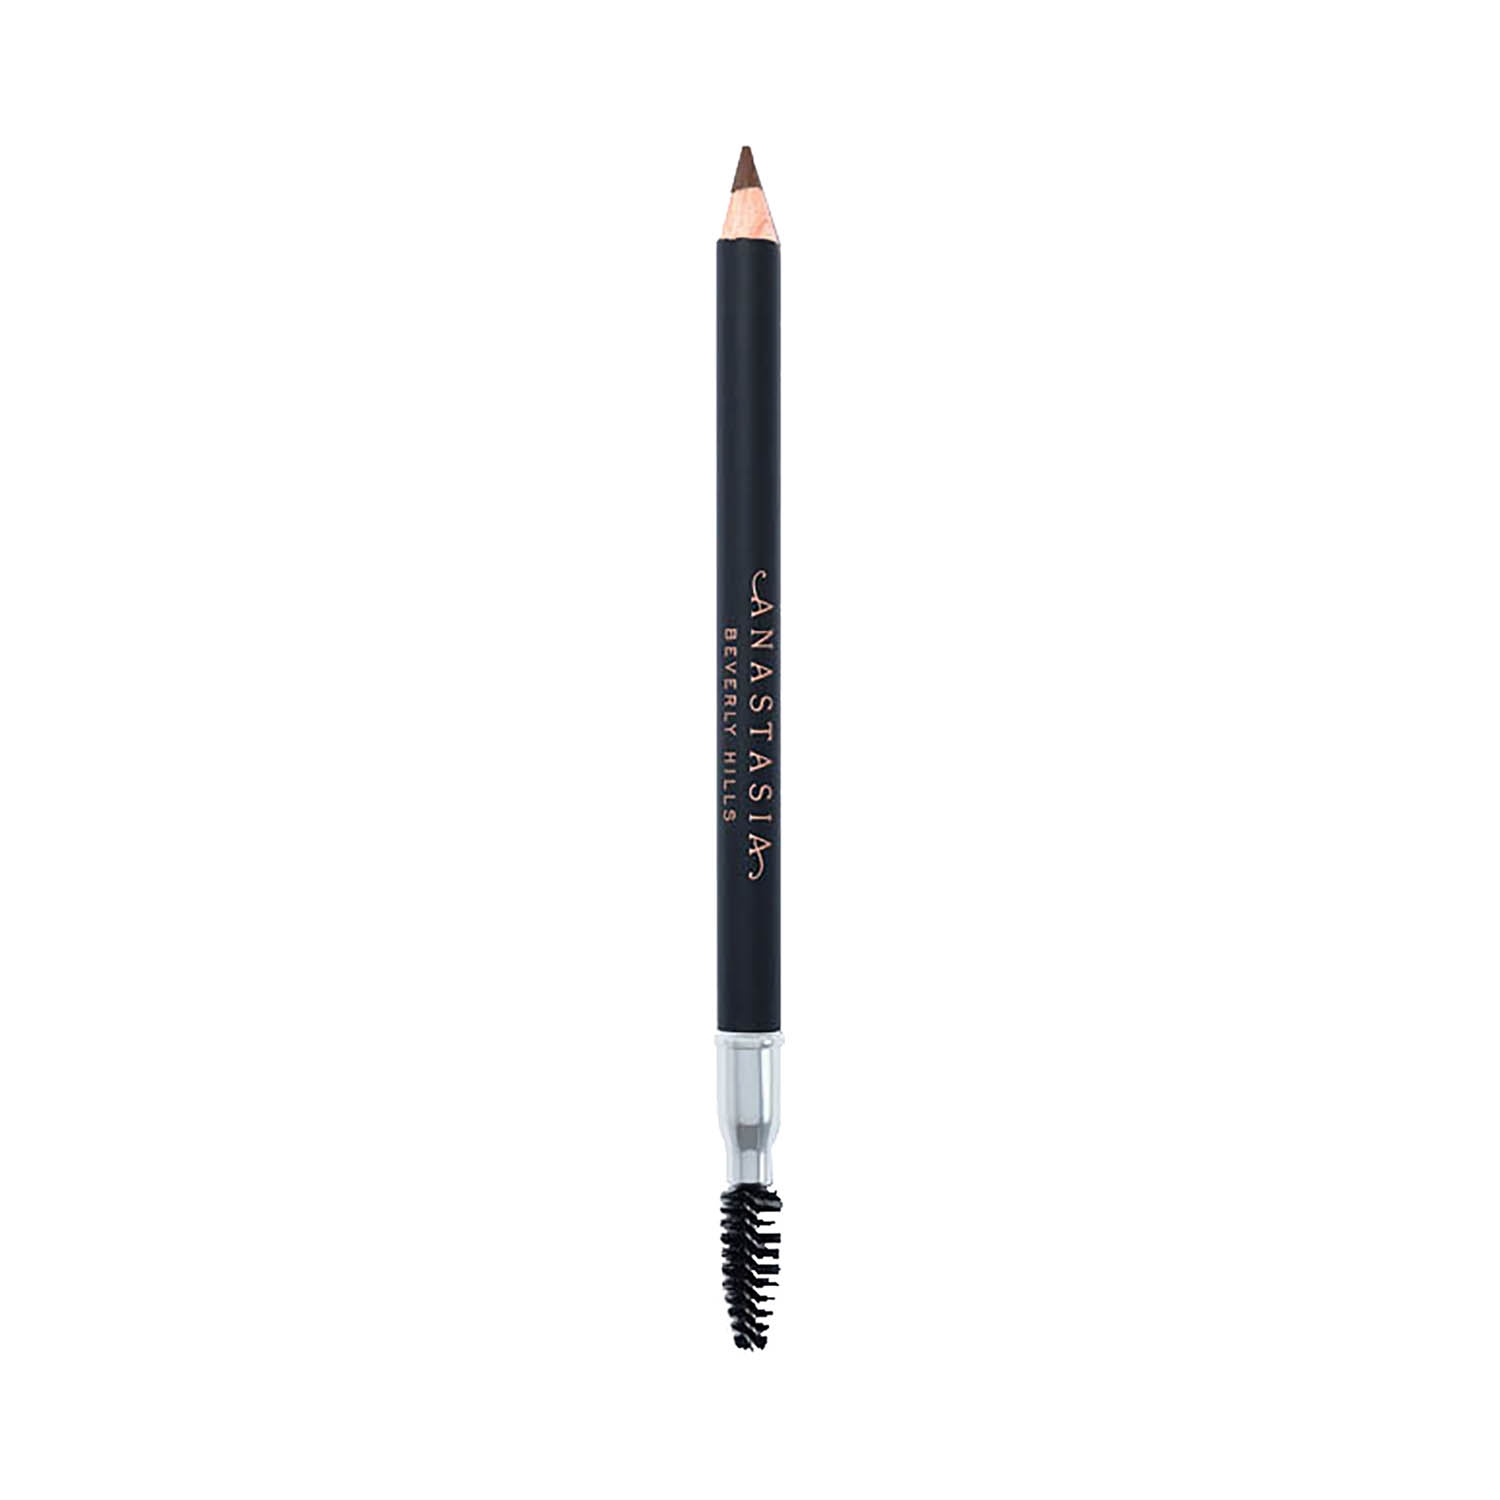 Anastasia Beverly Hills | Anastasia Beverly Hills Perfect Brow Pencil - Soft Brown (0.95g)